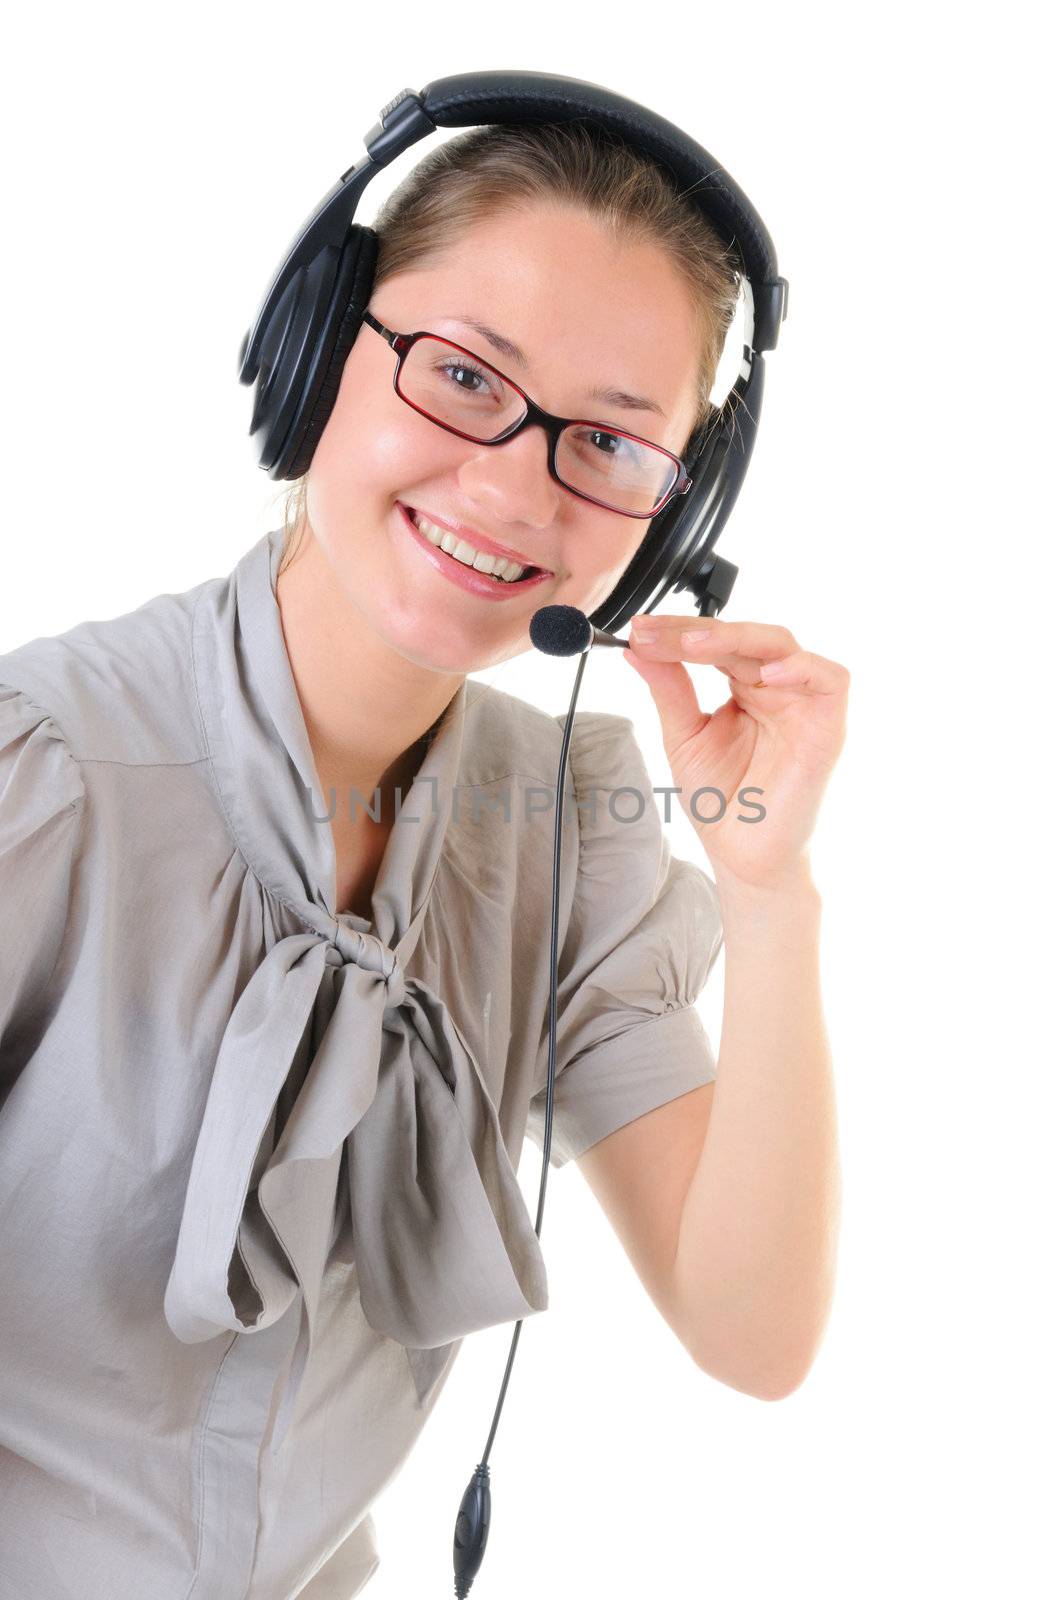 Smiling call-center representative with headset on white background